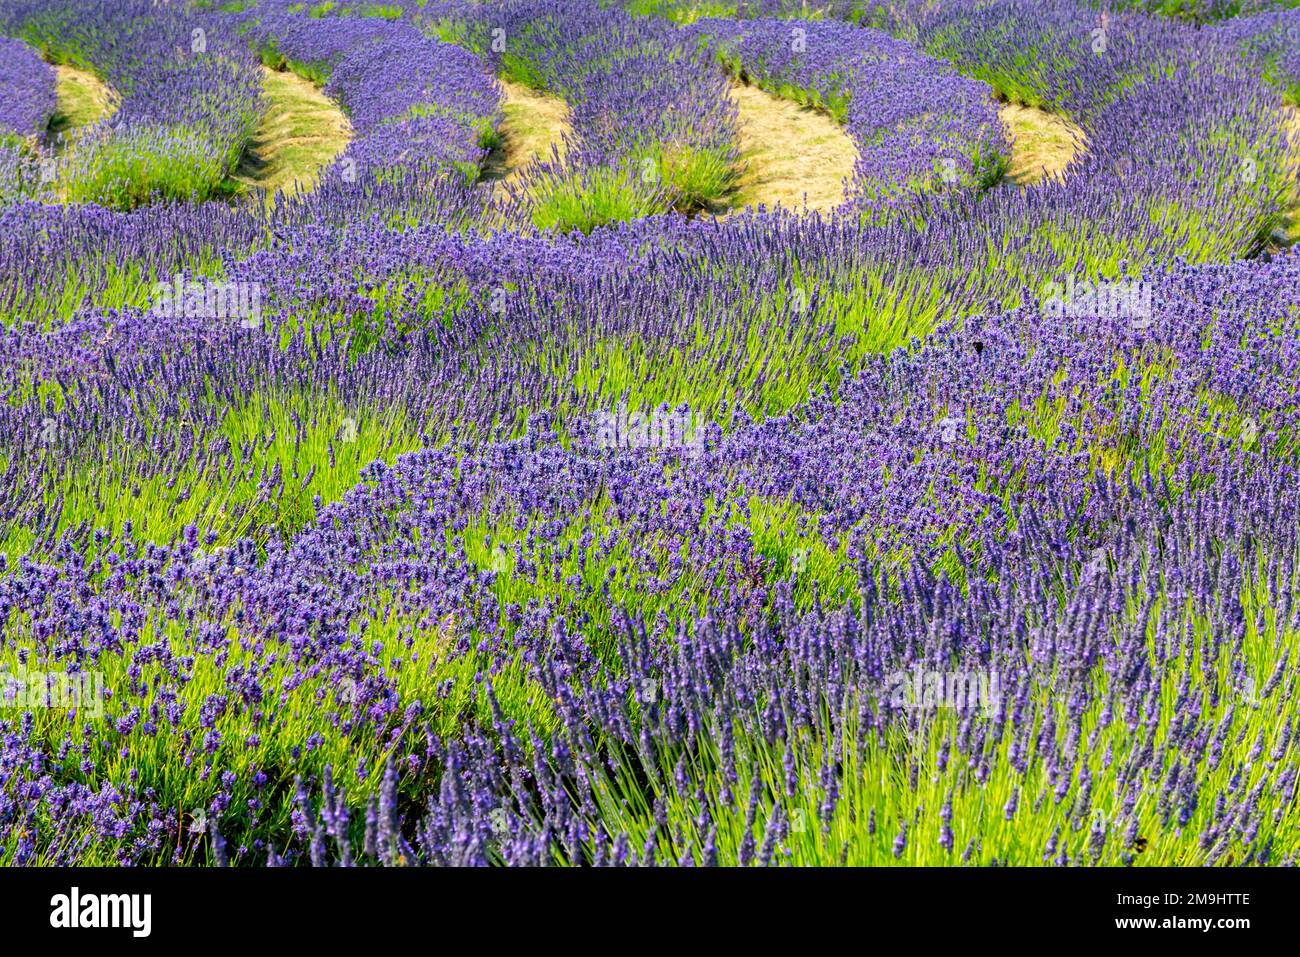 Lavender growing in summer at Yorkshire Lavender farm a tourist attraction near Terrington in North Yorkshire England UK. Stock Photo